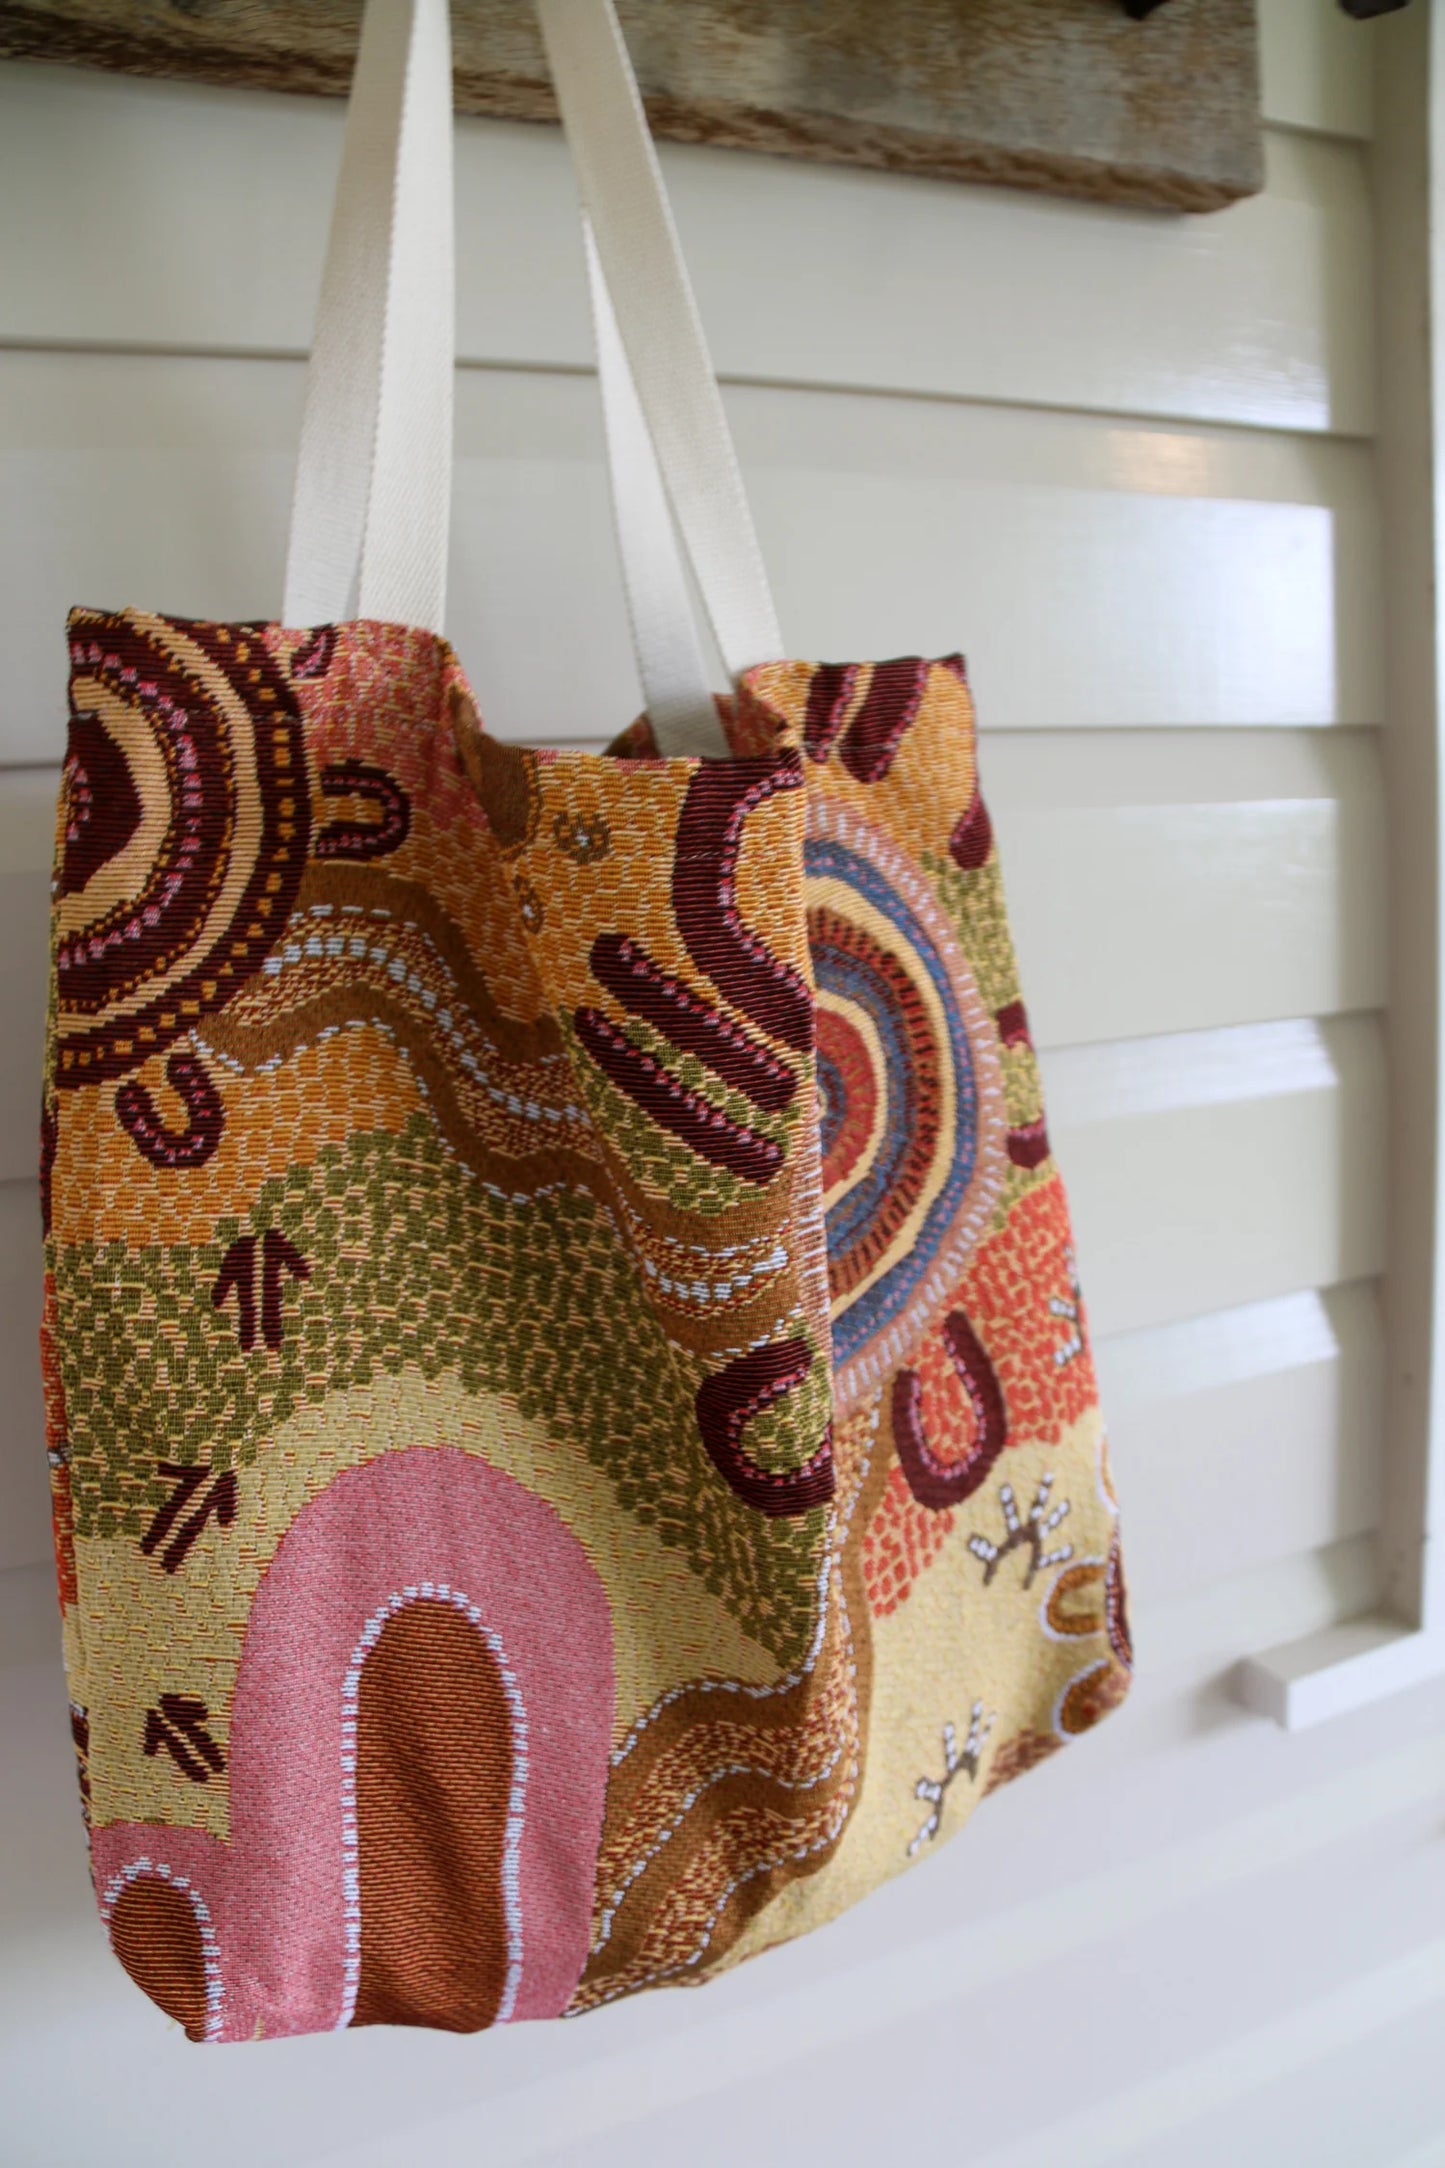 ‘COMING HOME’ TOTE